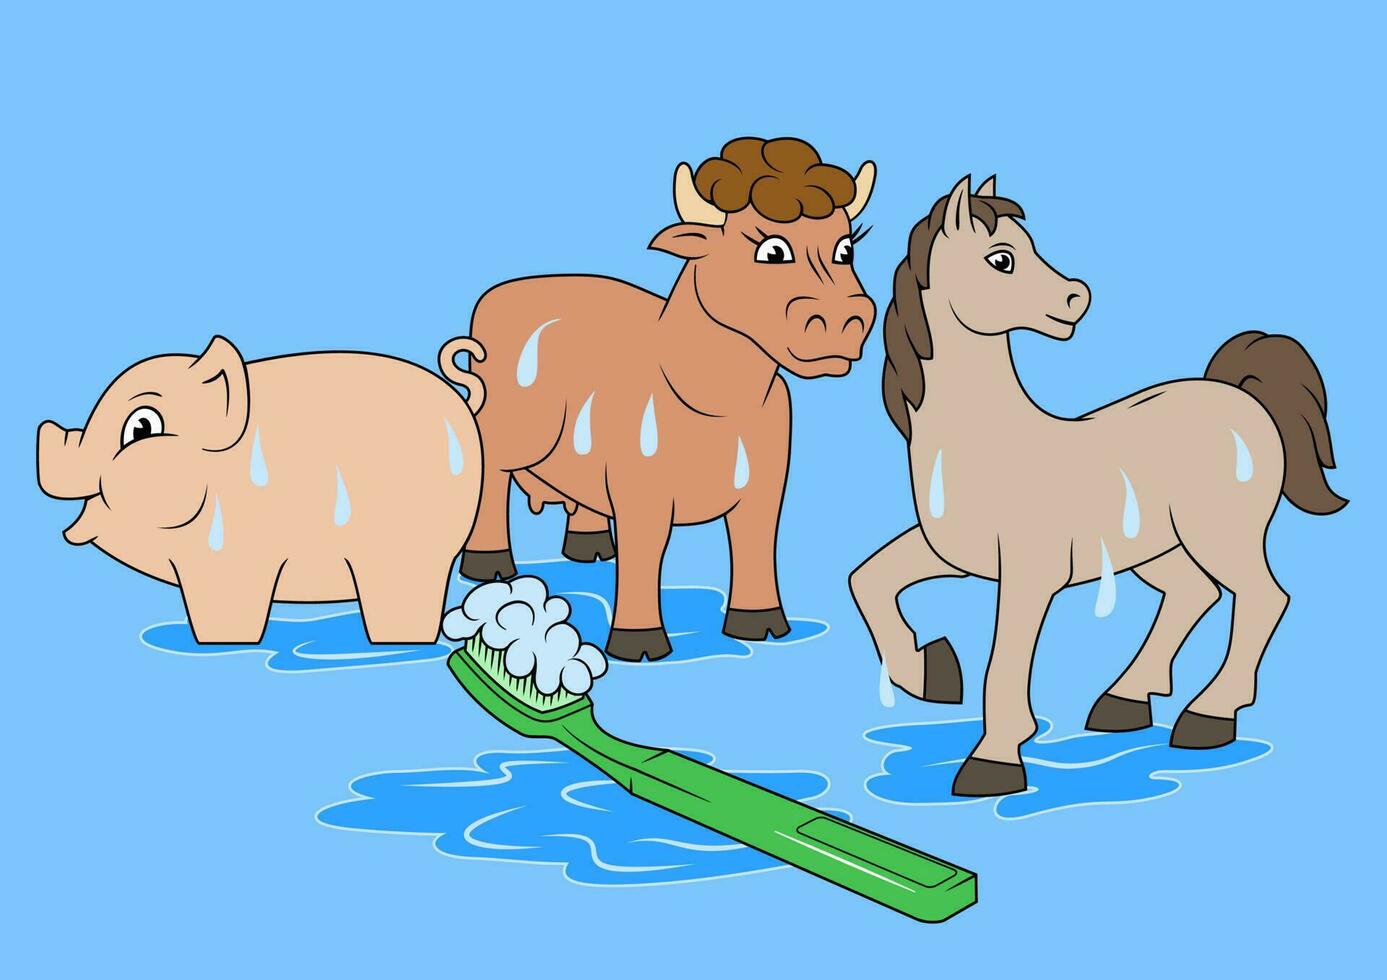 Washing toys. Pig, Cow, Horse, Toothbrush with soap. All elements are separate. Vector illustration.